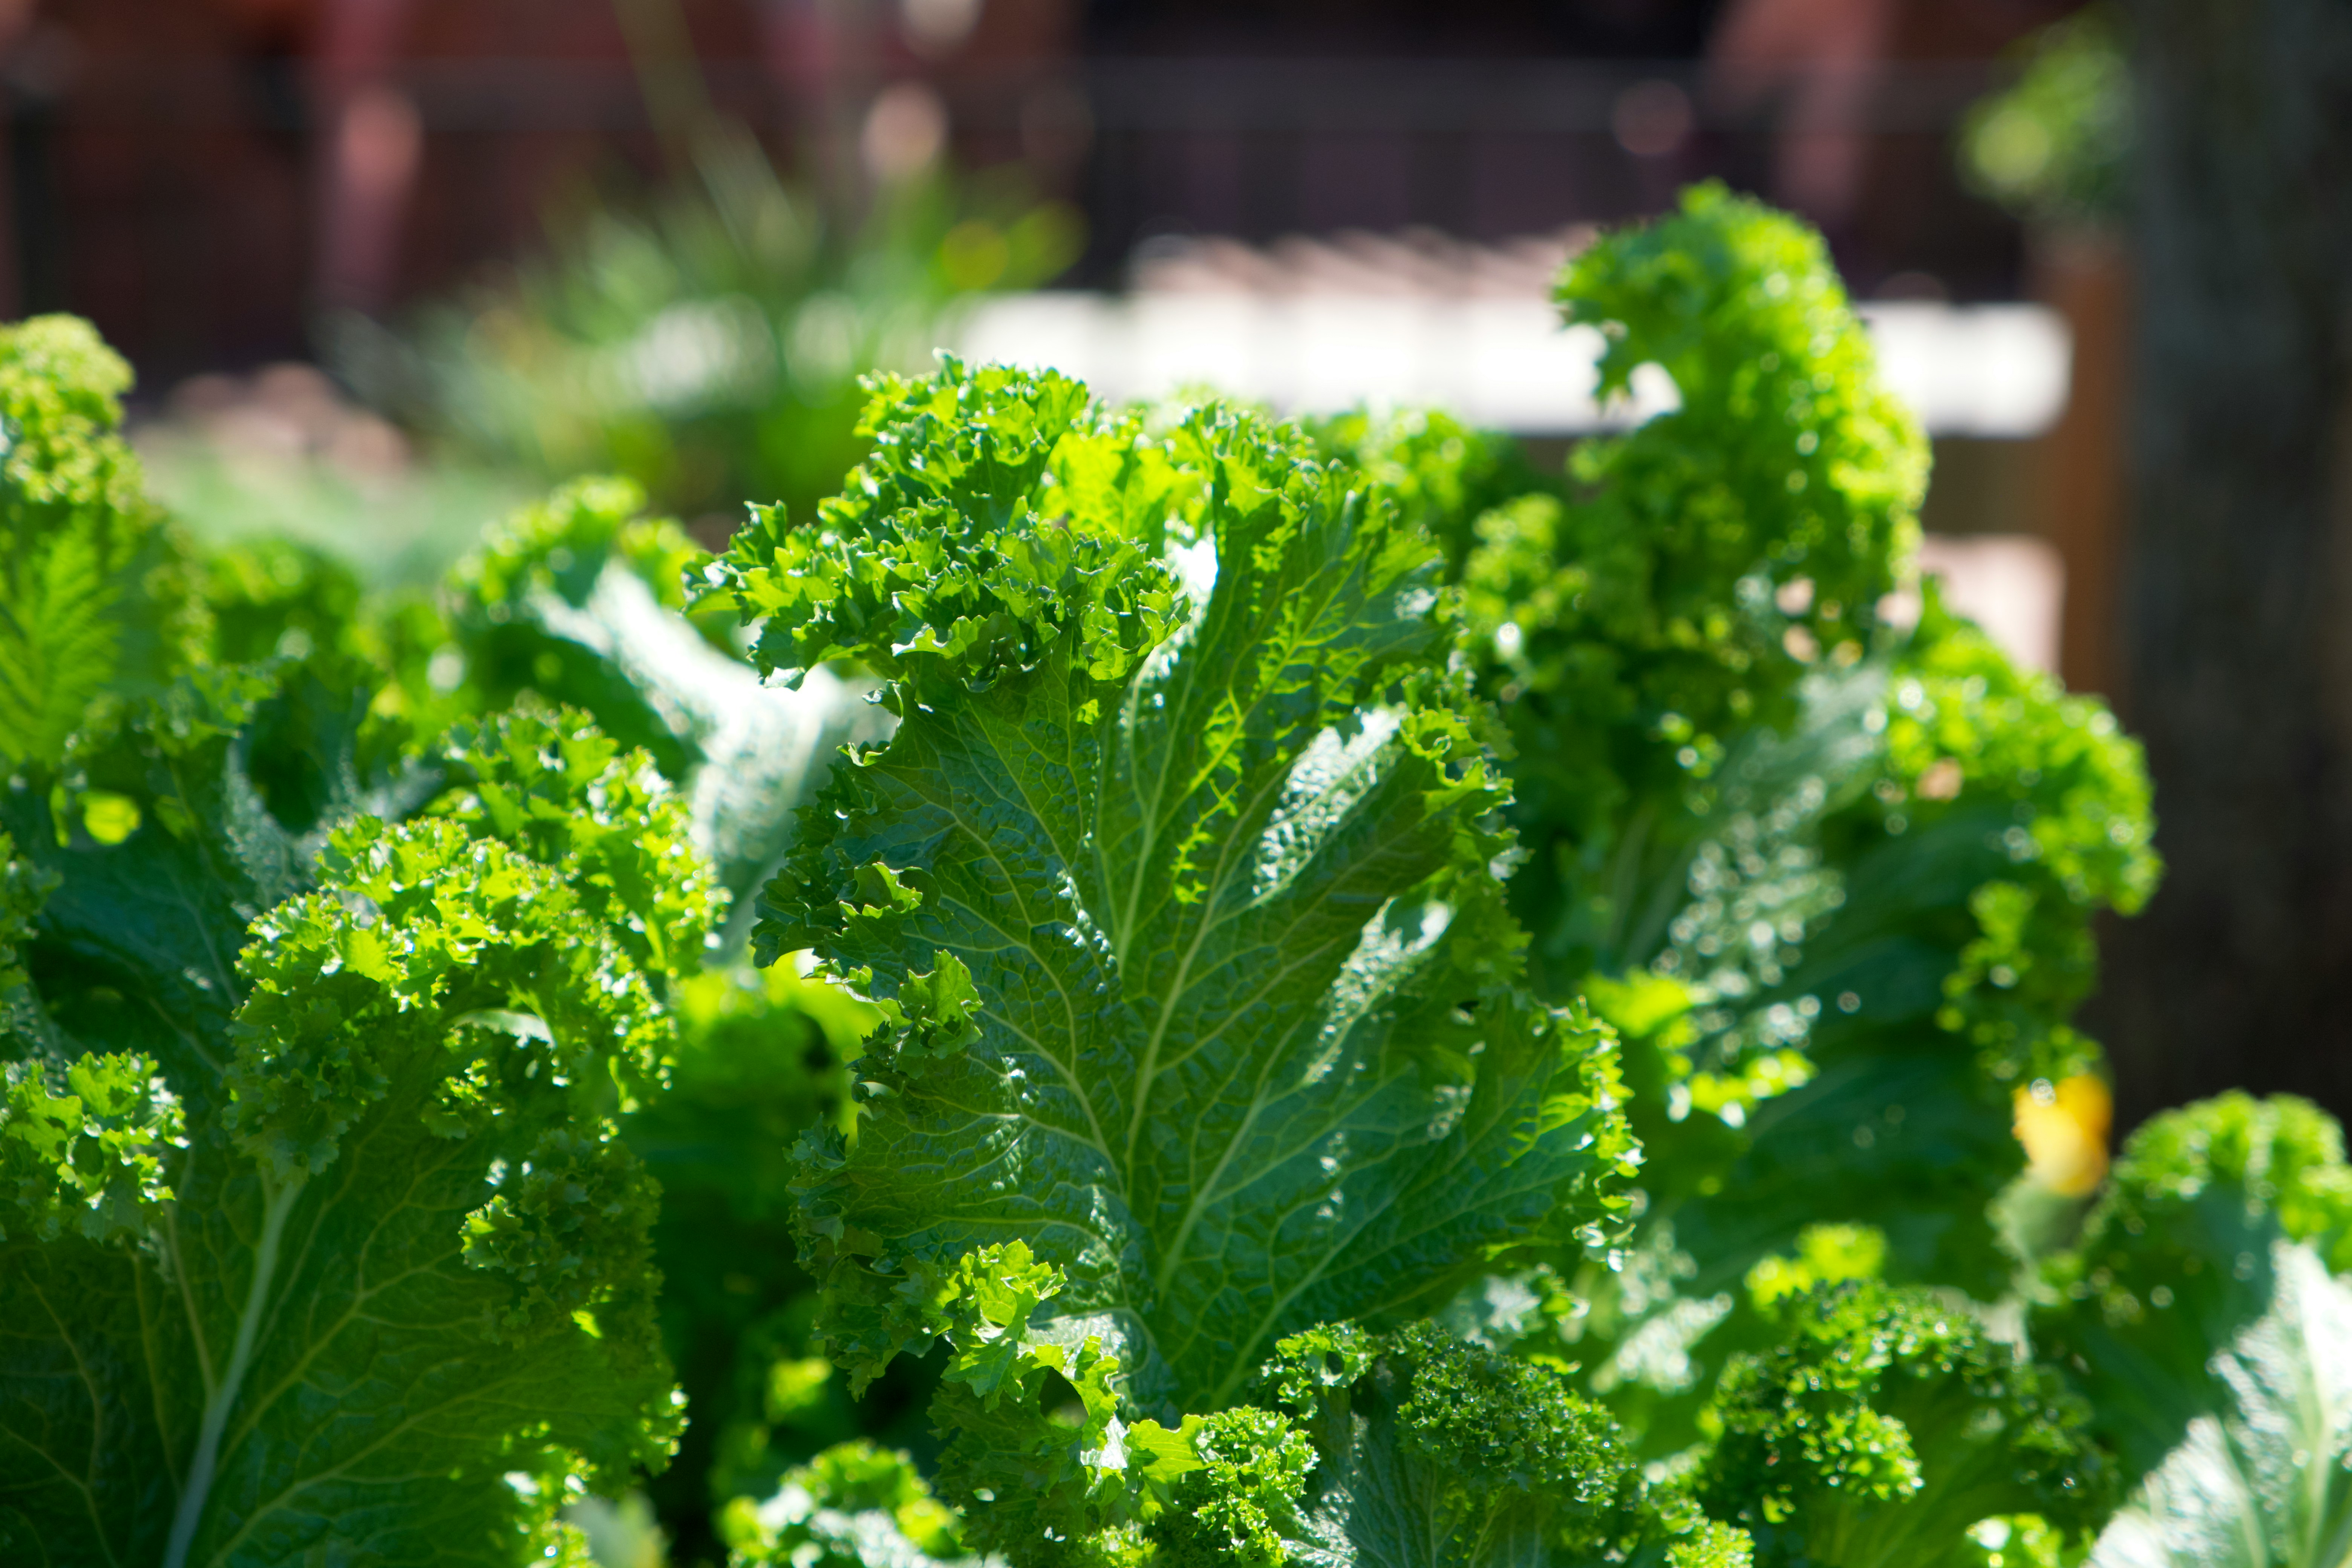 Kale loves a little frost and will last well into the colder months. Image credit: Brian McGowan